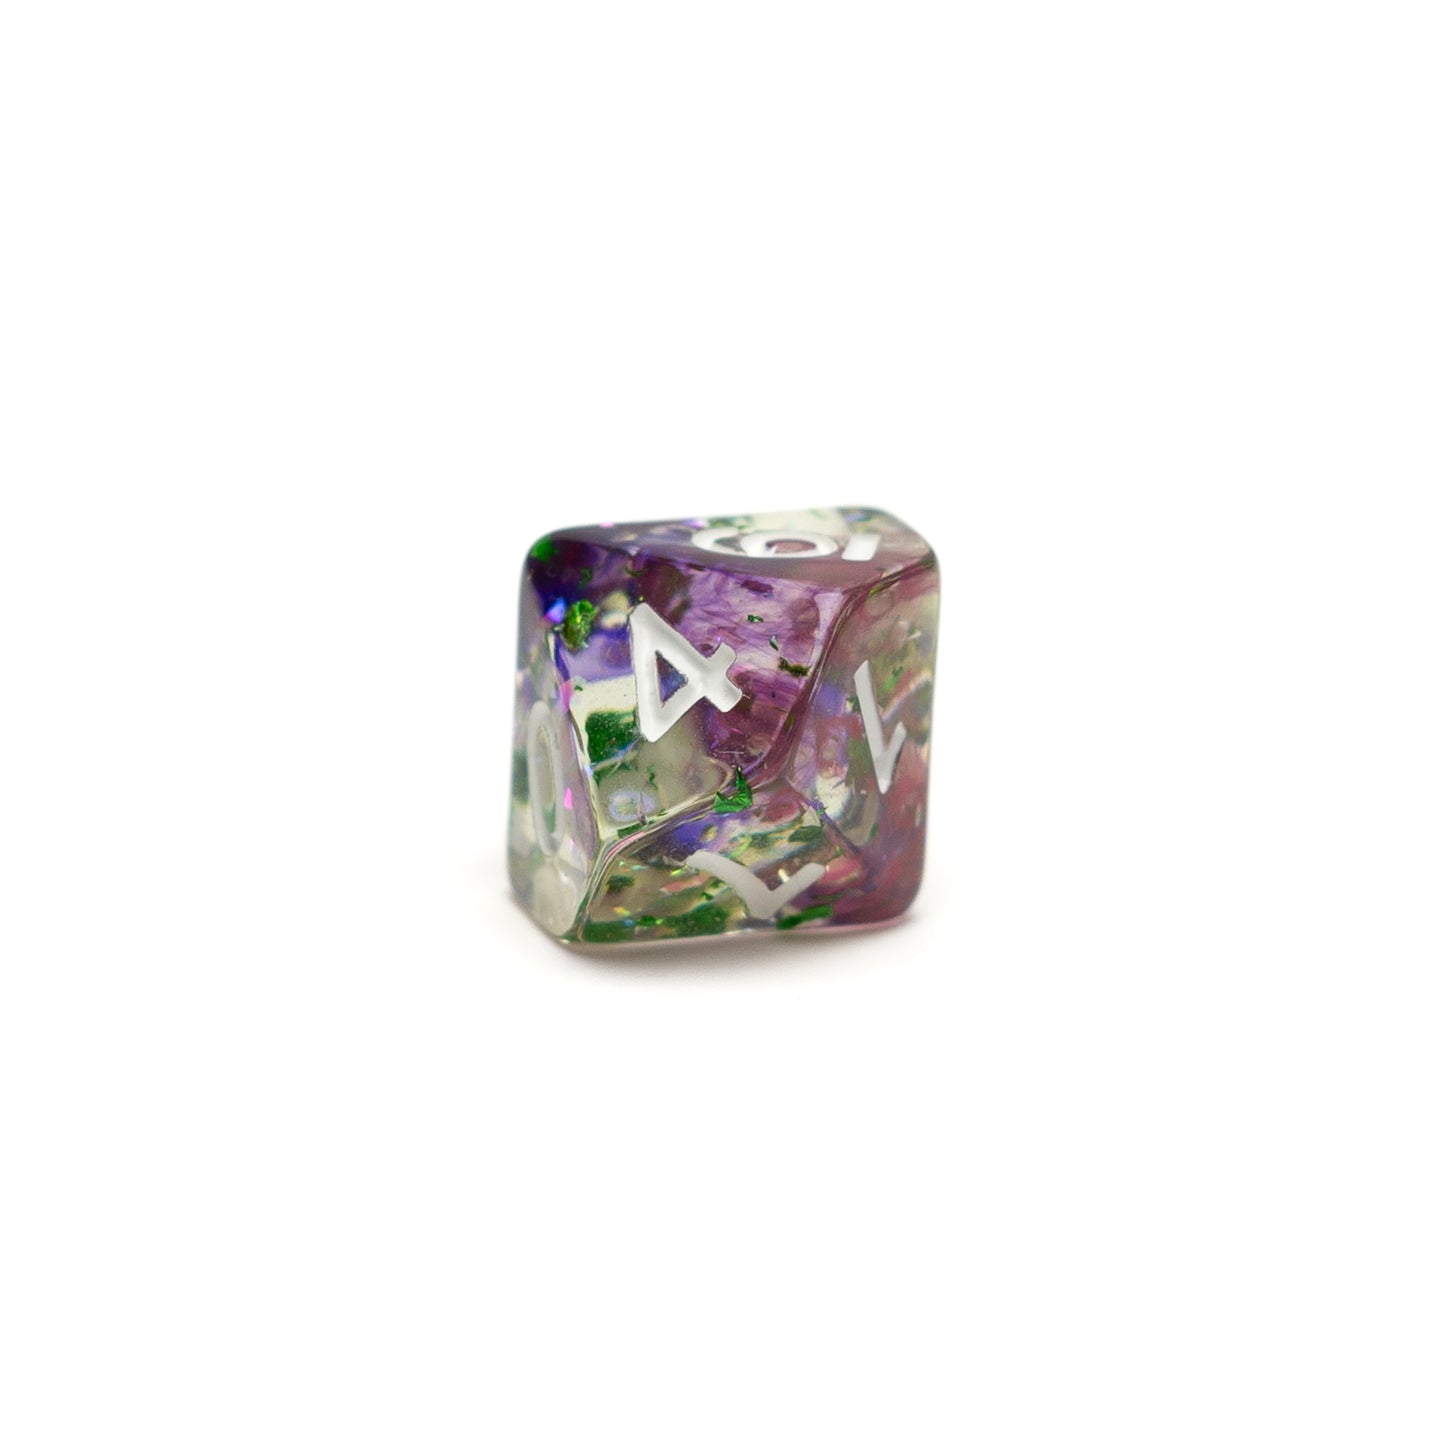 Roll Britannia Malrus and Milo Tosscobble Dungeons and Dragons D10 Dice with Swirling Purple and Green Glitter Aesthetic